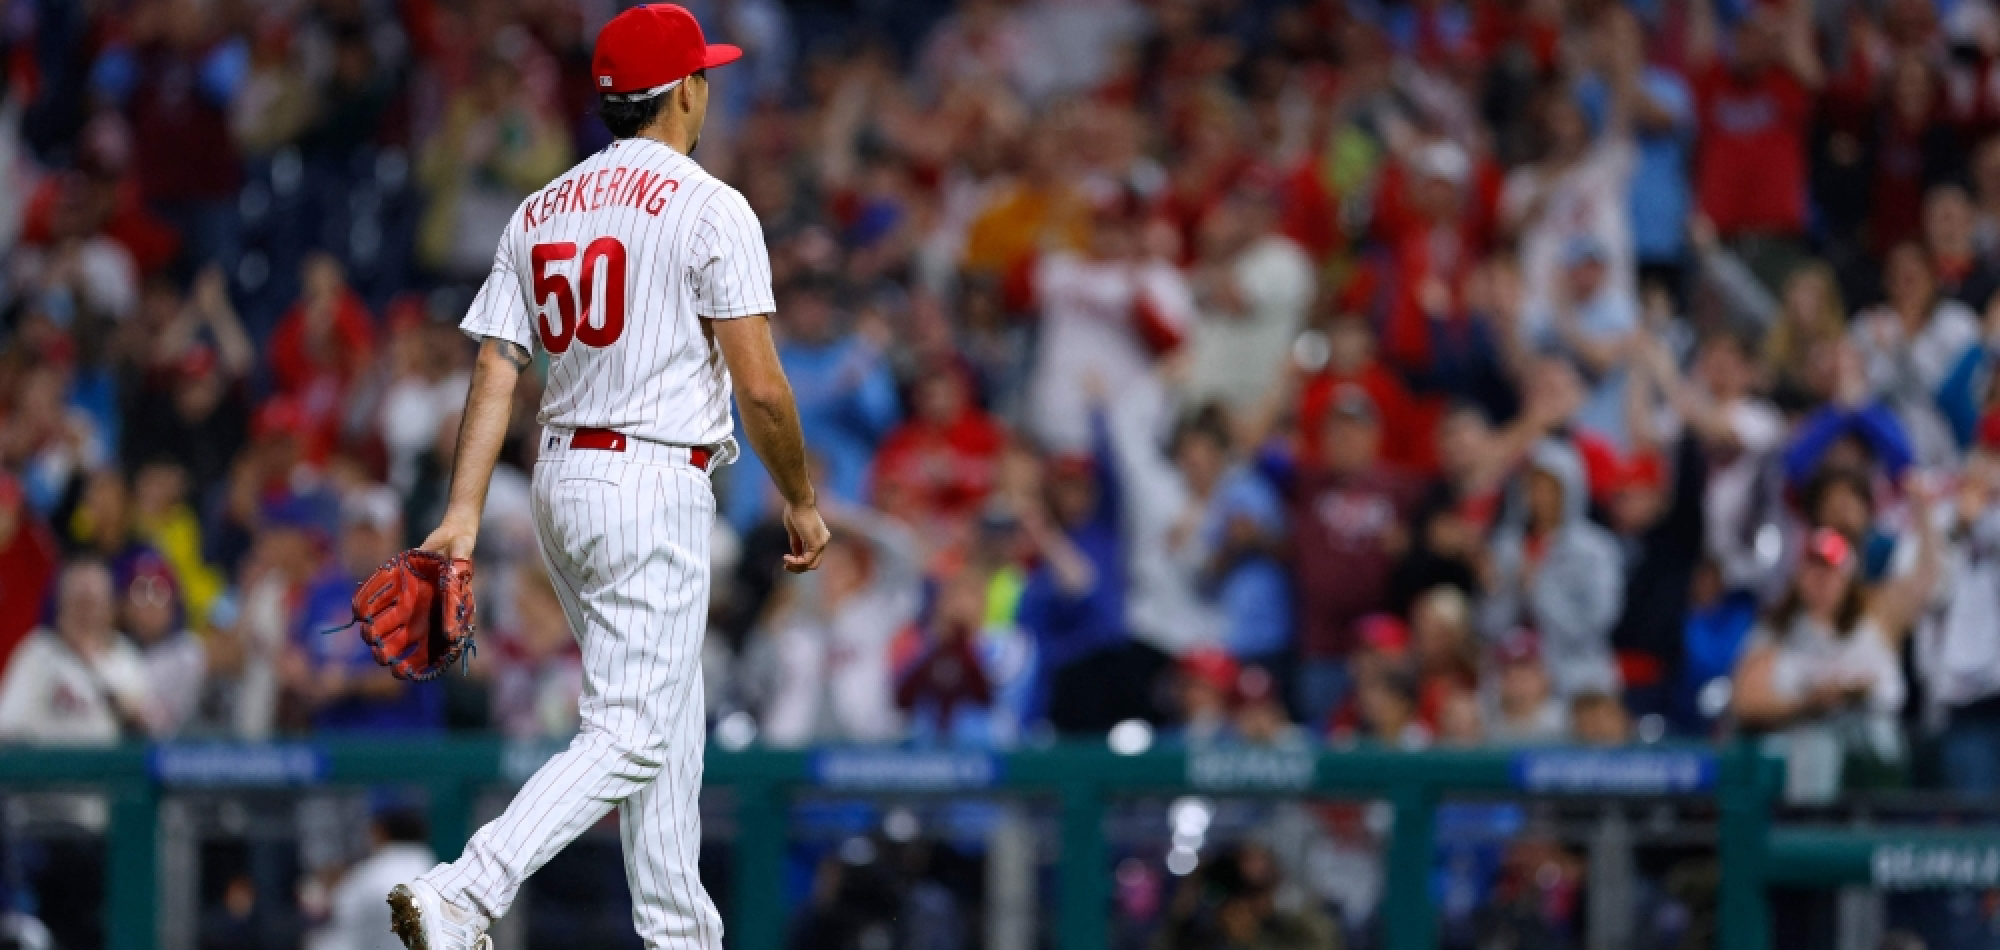 Phillies have the arms and big bats to make a second straight run